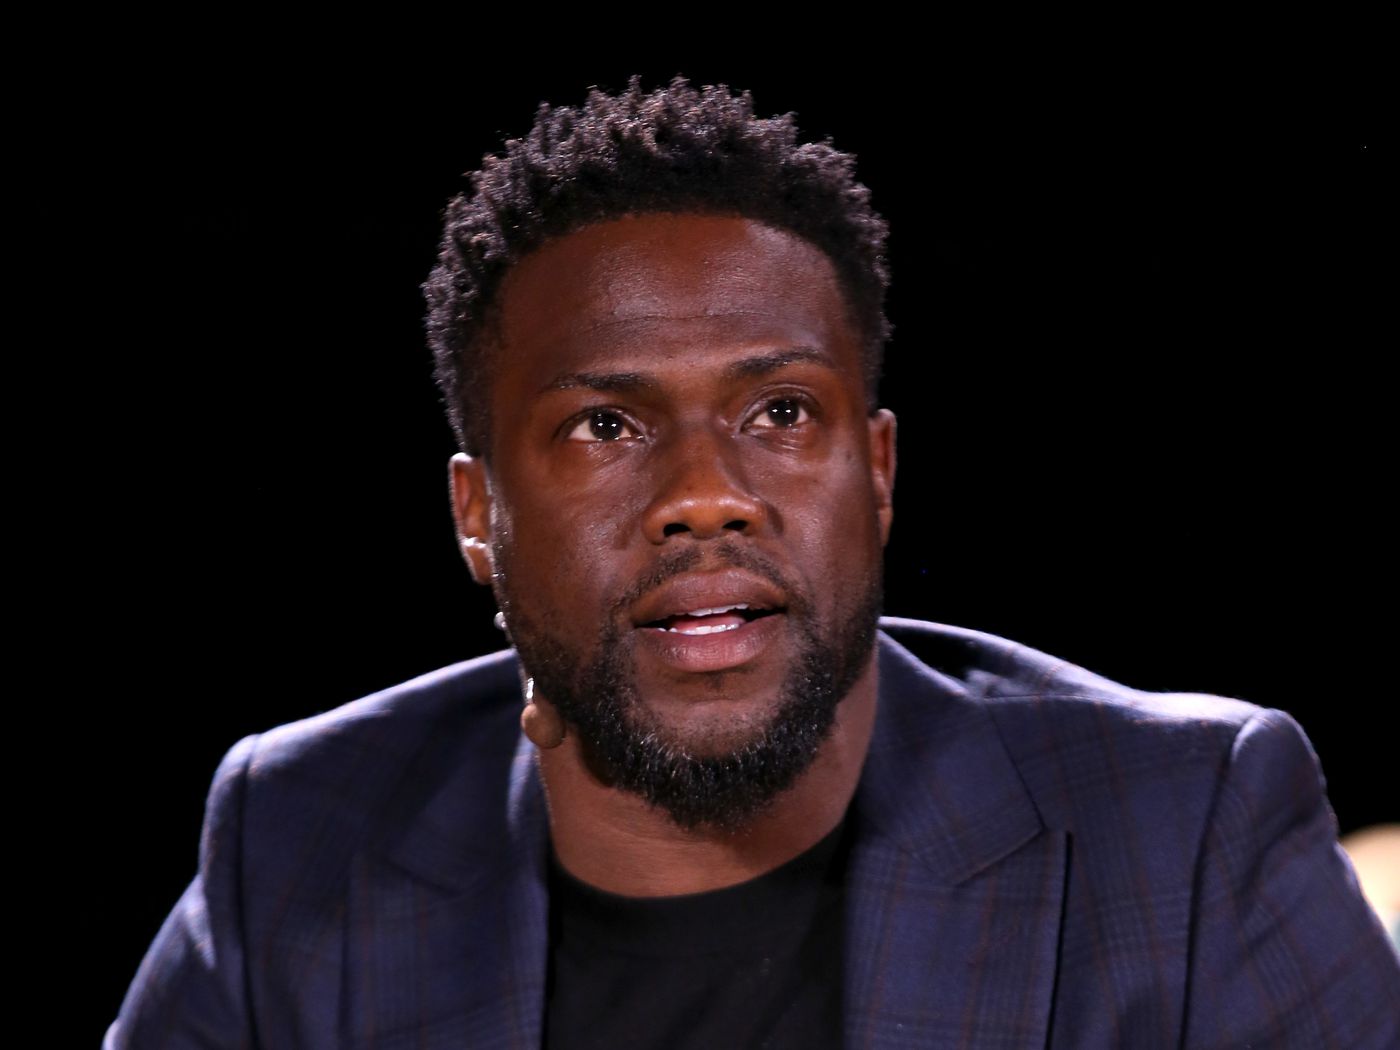 Kevin Hart's Oscars backlash and the myth of the internet mob - Vox